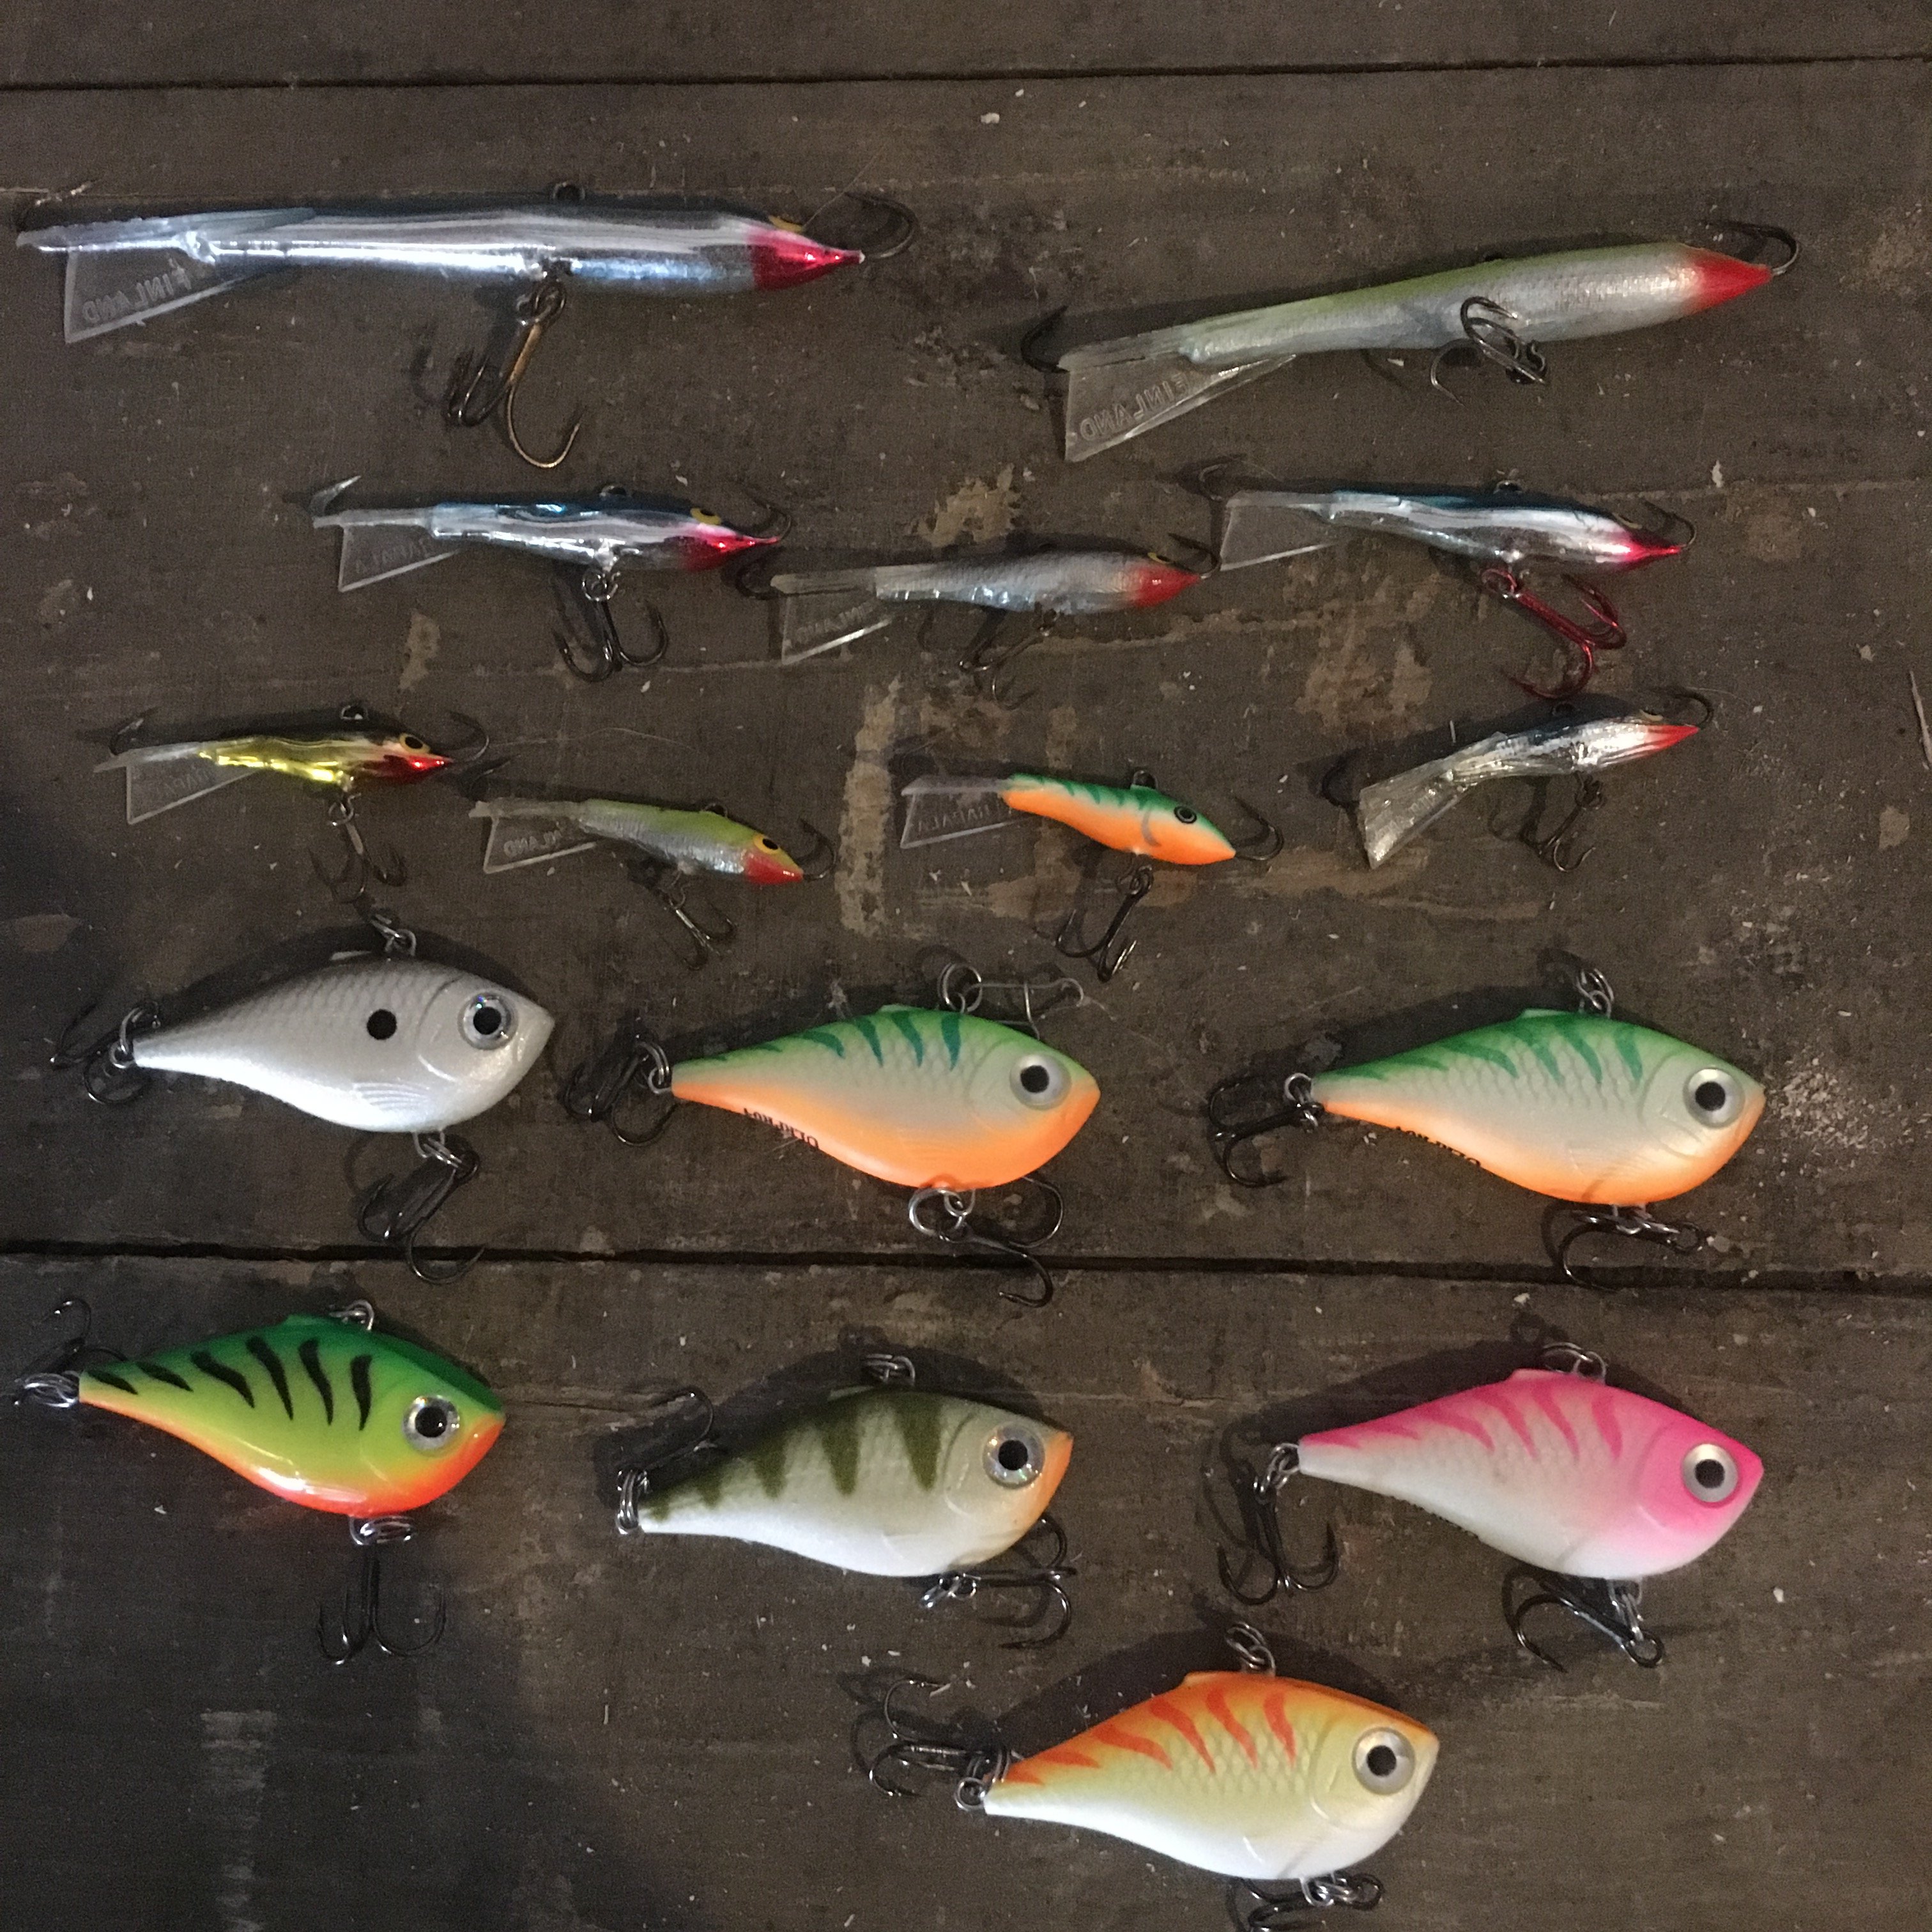 Ice lures - Classified Ads | In-Depth Outdoors